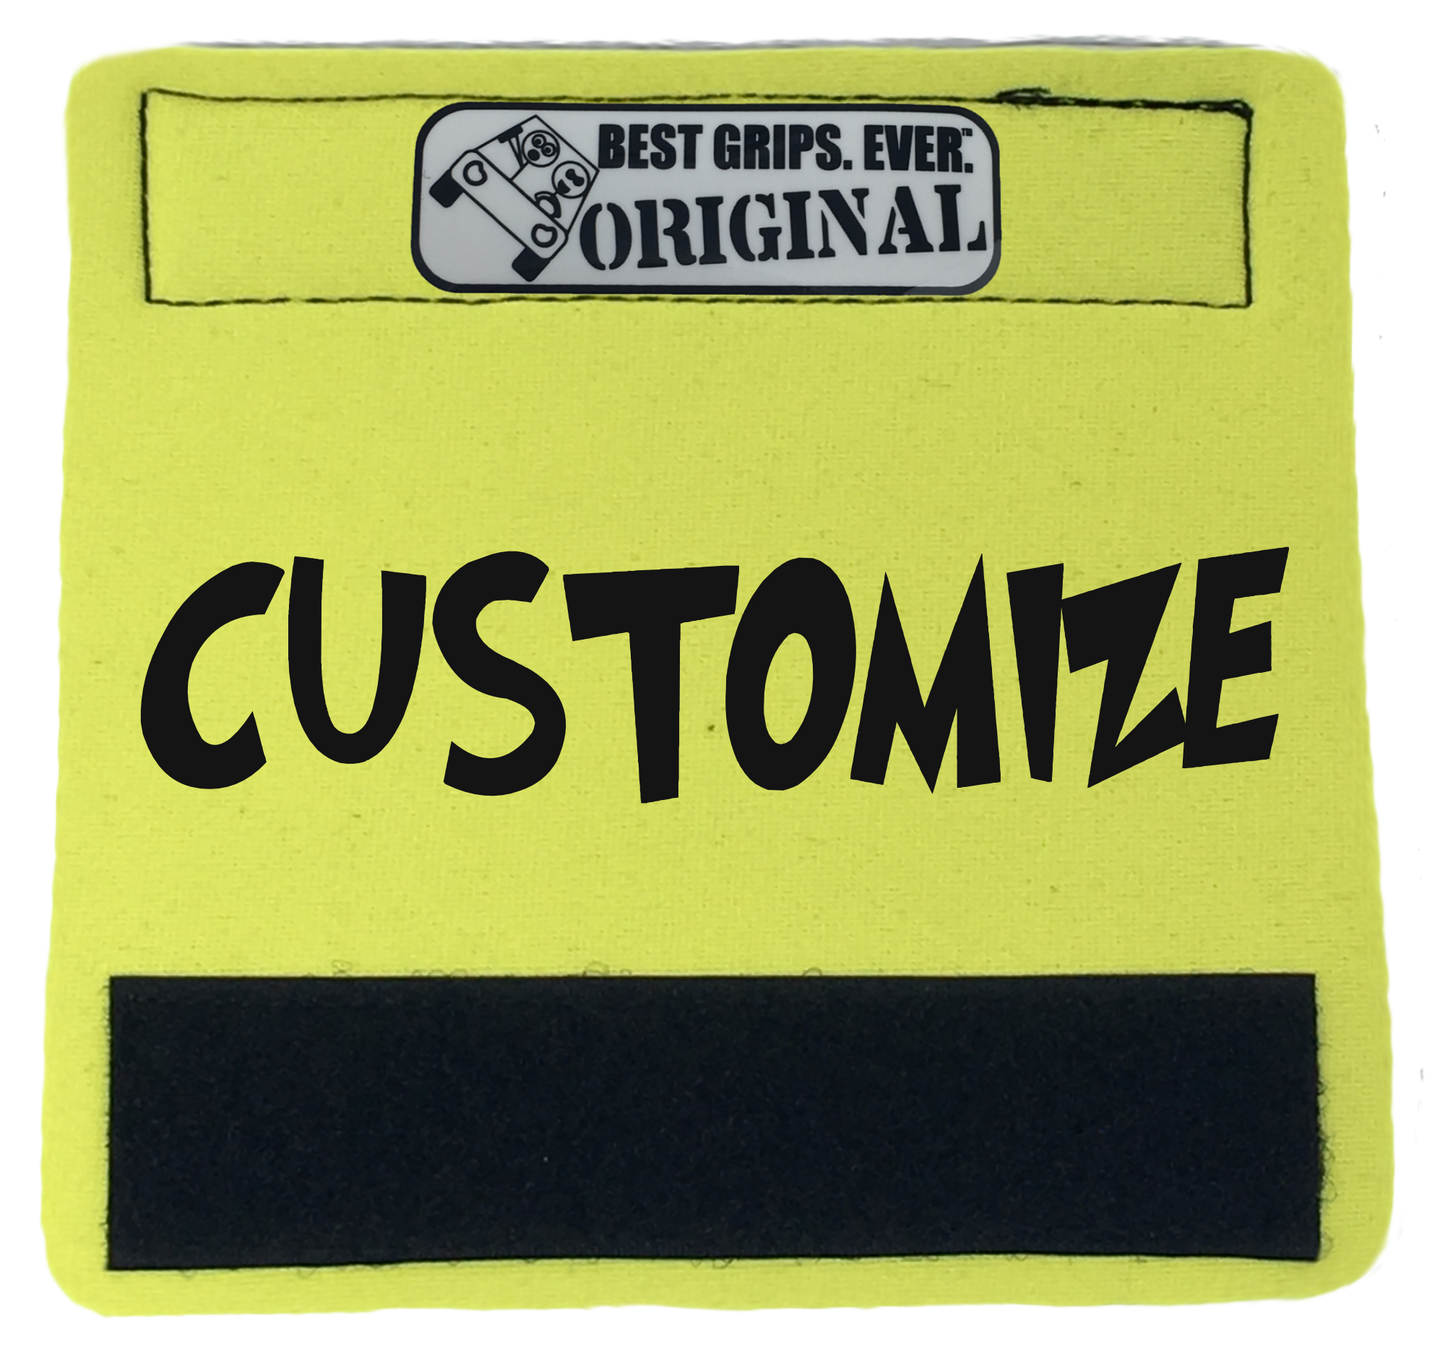 The Custom Grip. (3 Color) - BEST GRIPS. EVER.®